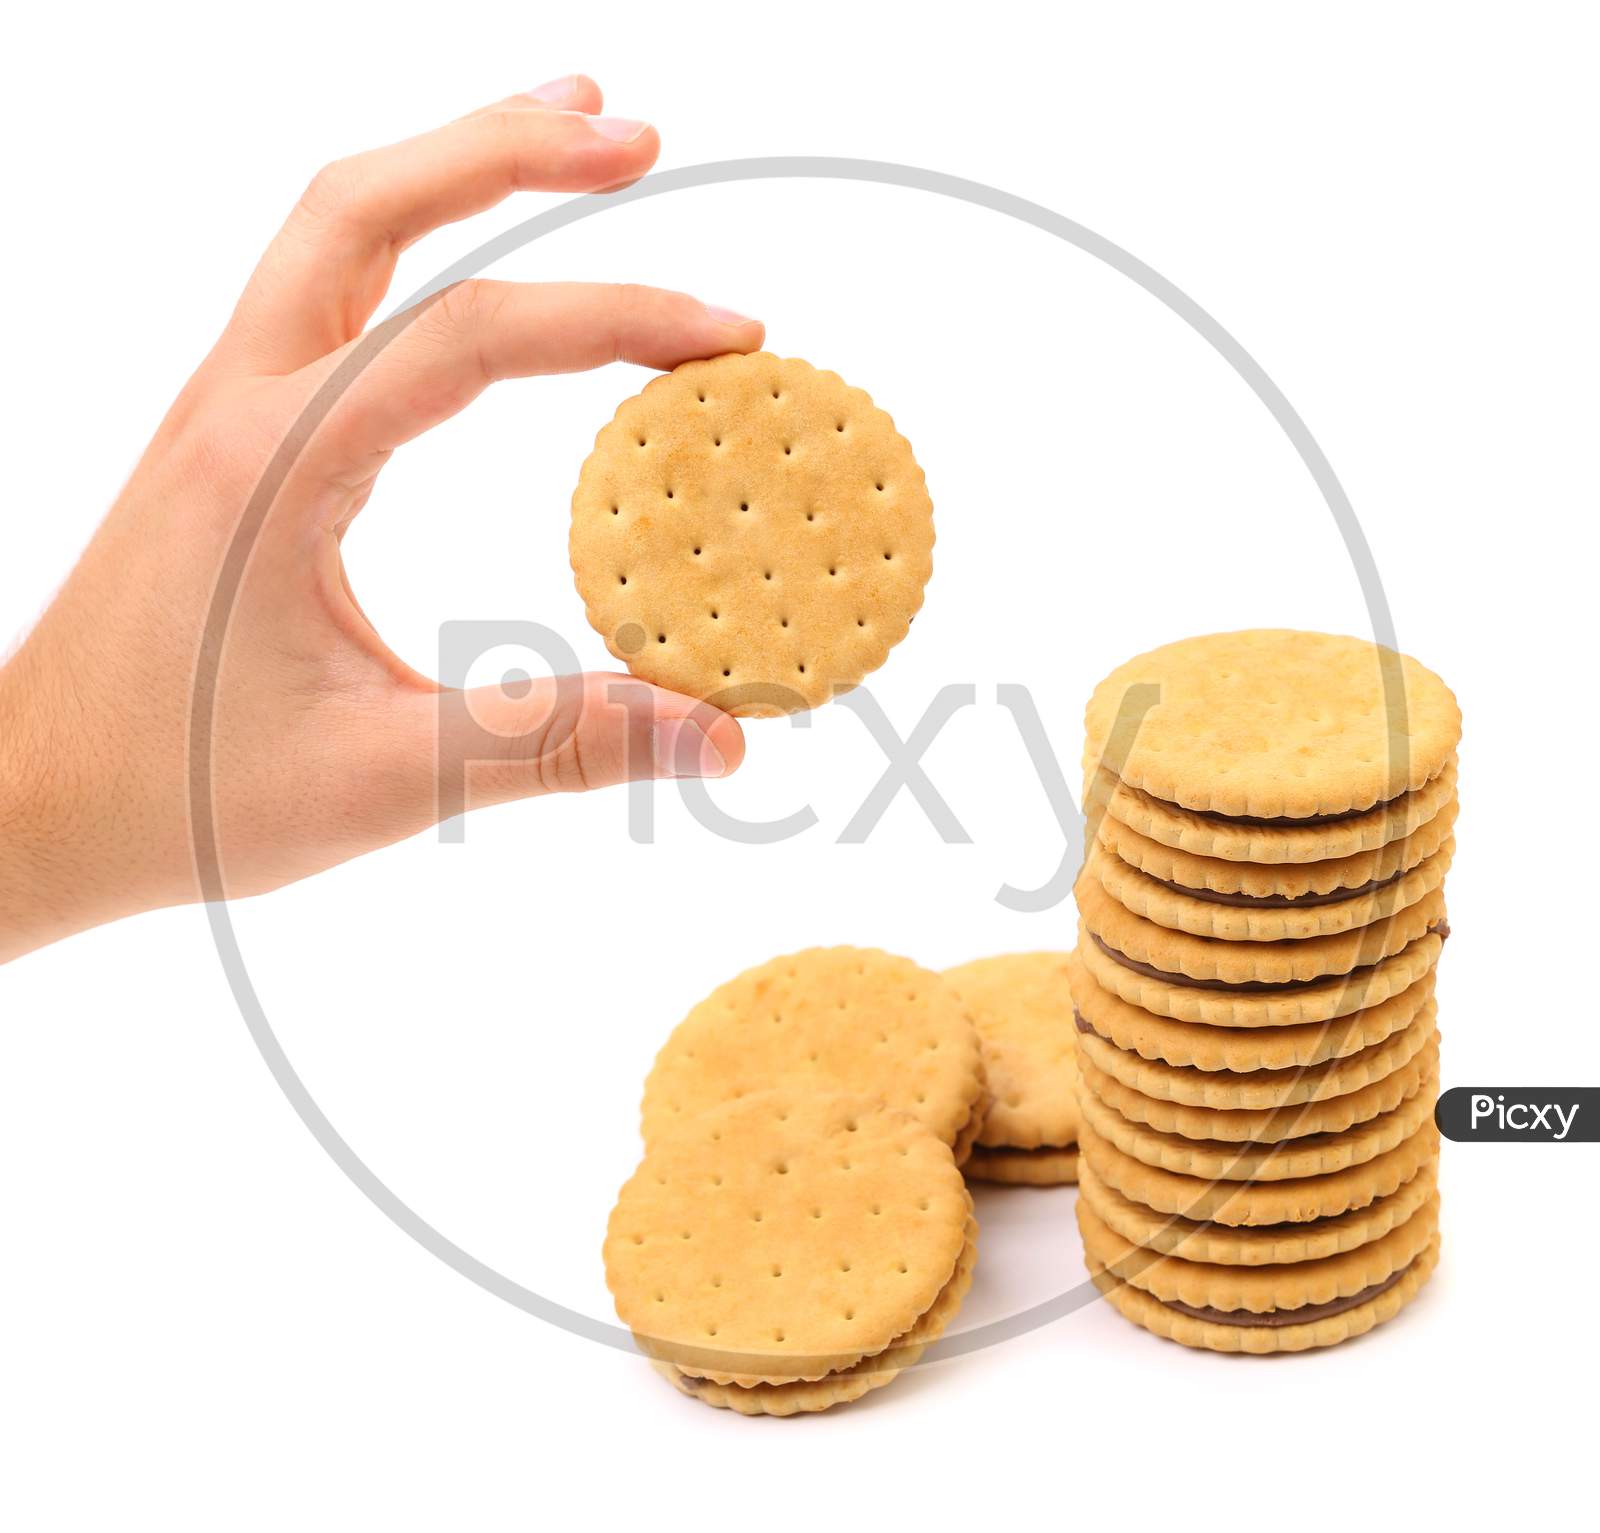 Closeup Cookie Biscuits With Filling. Isolated On A White Background.